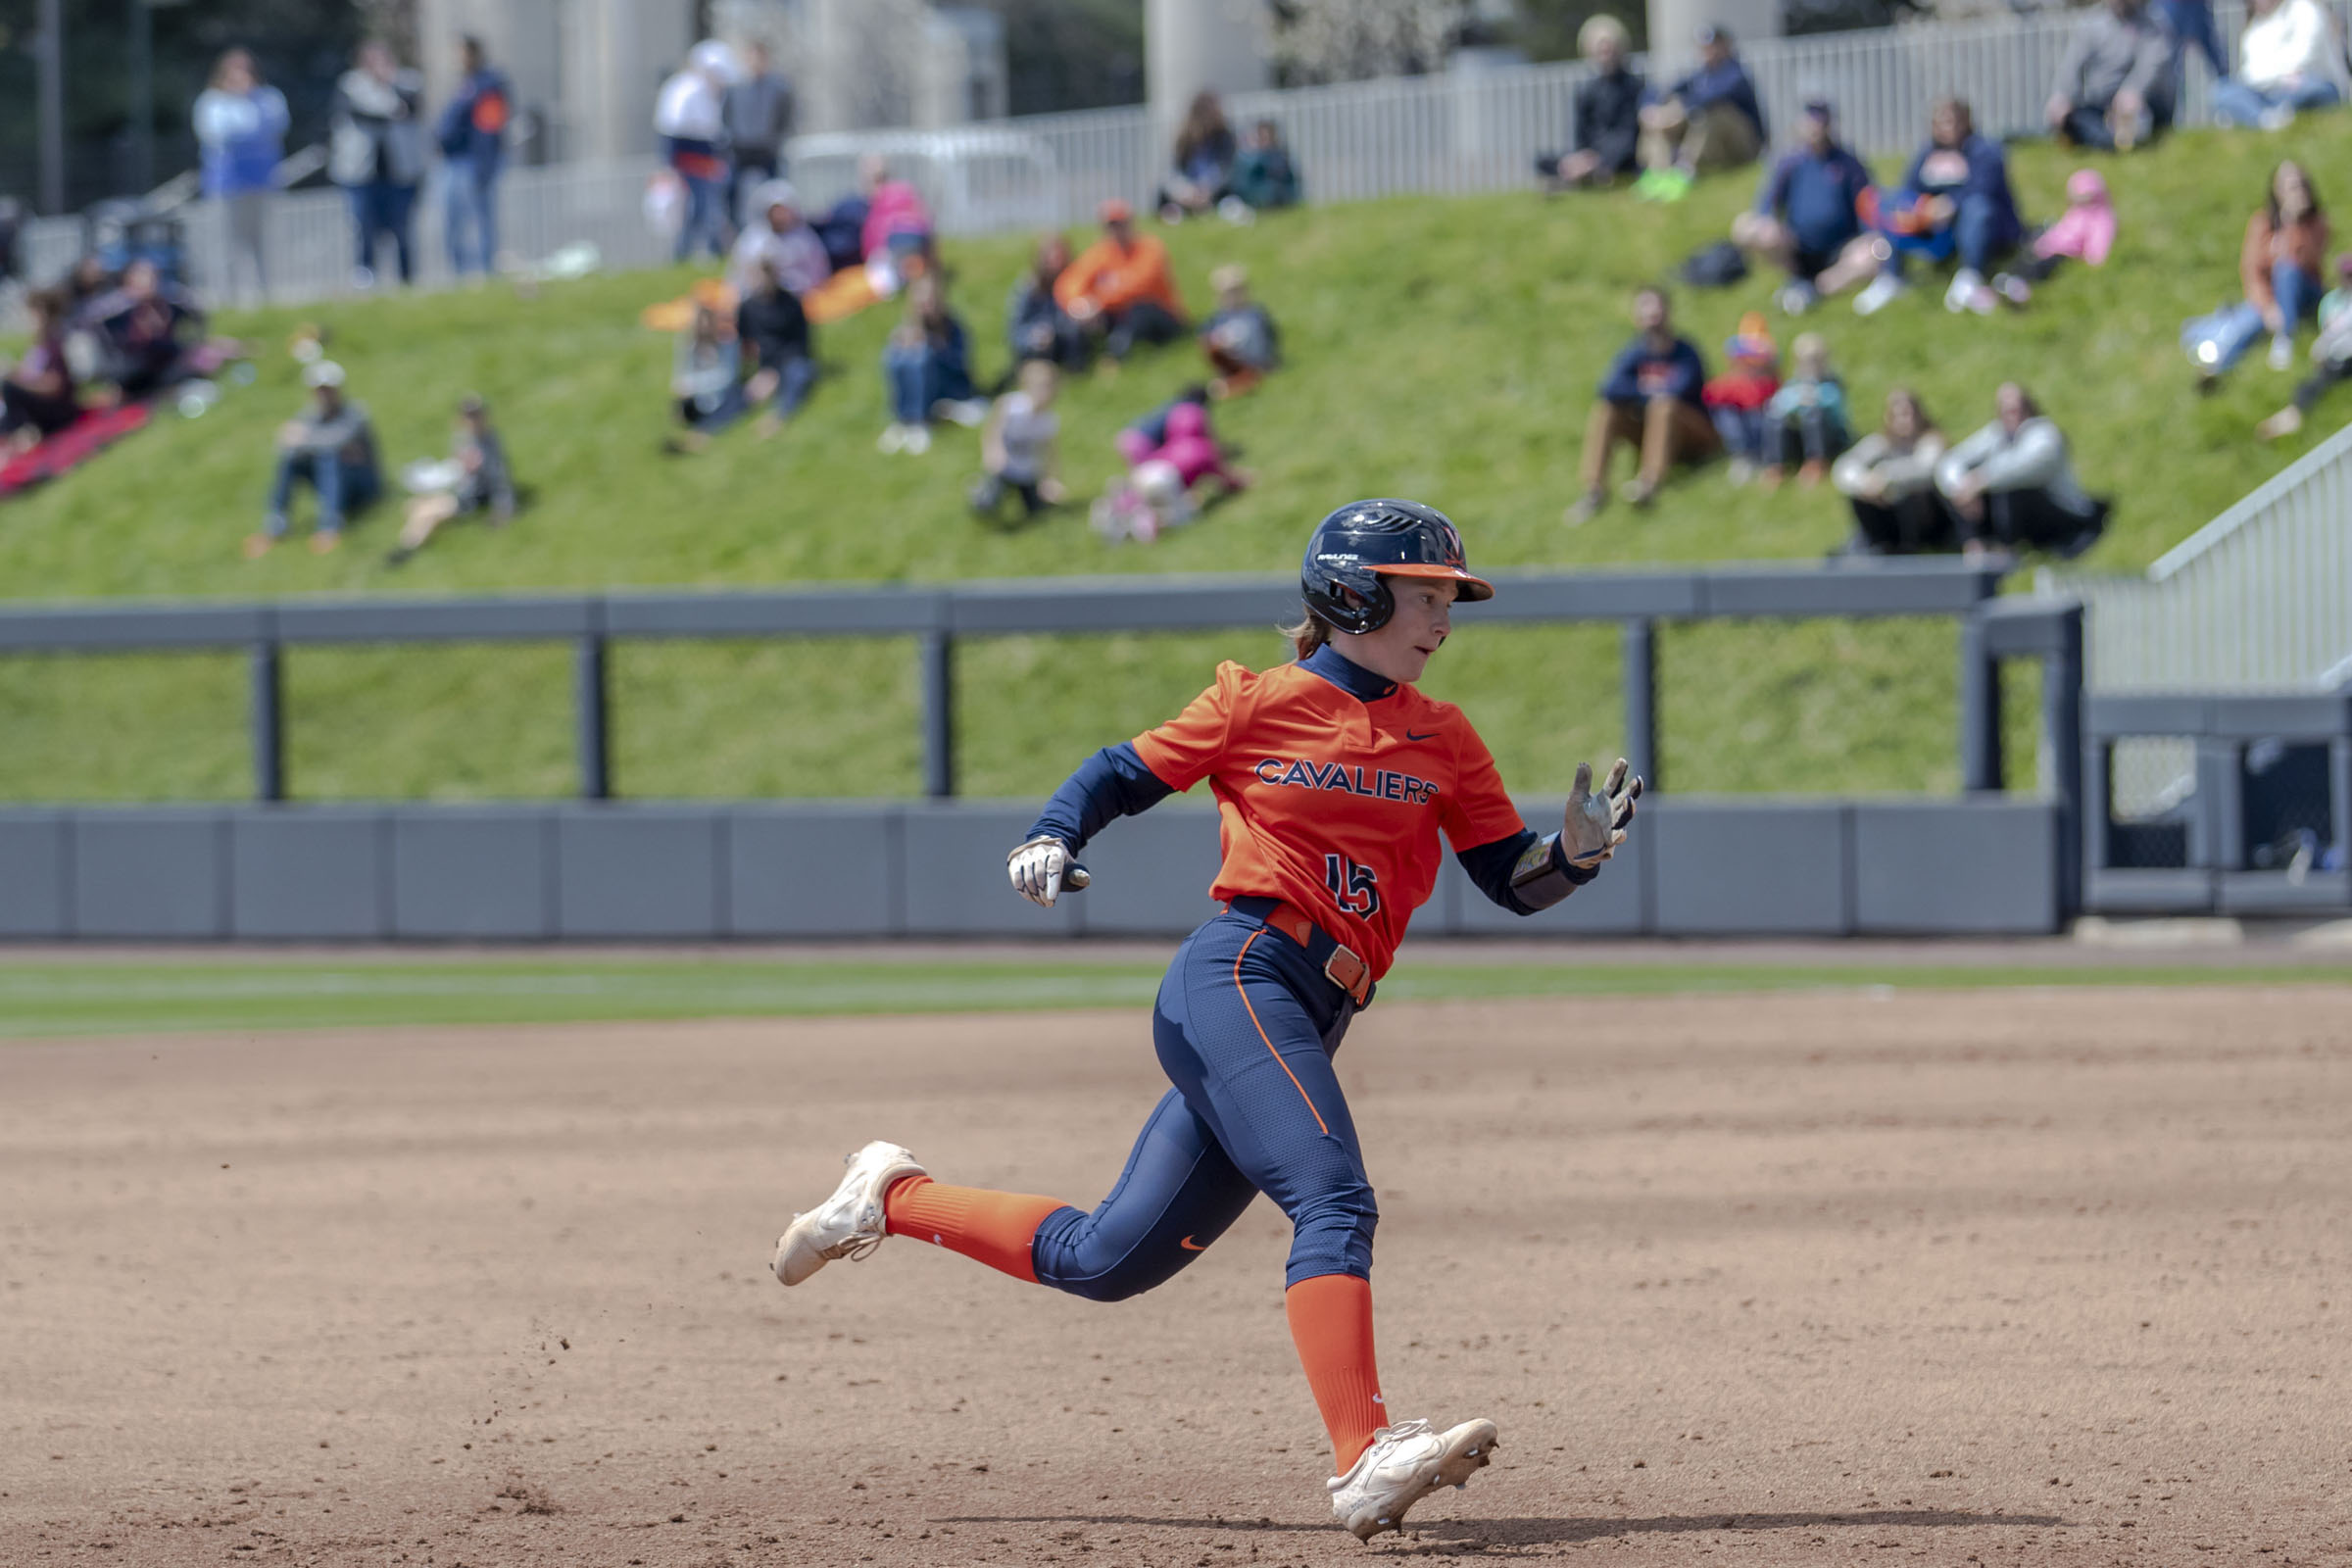 A UVA softball player runs to second base. People sitting on a grassy hill look on.